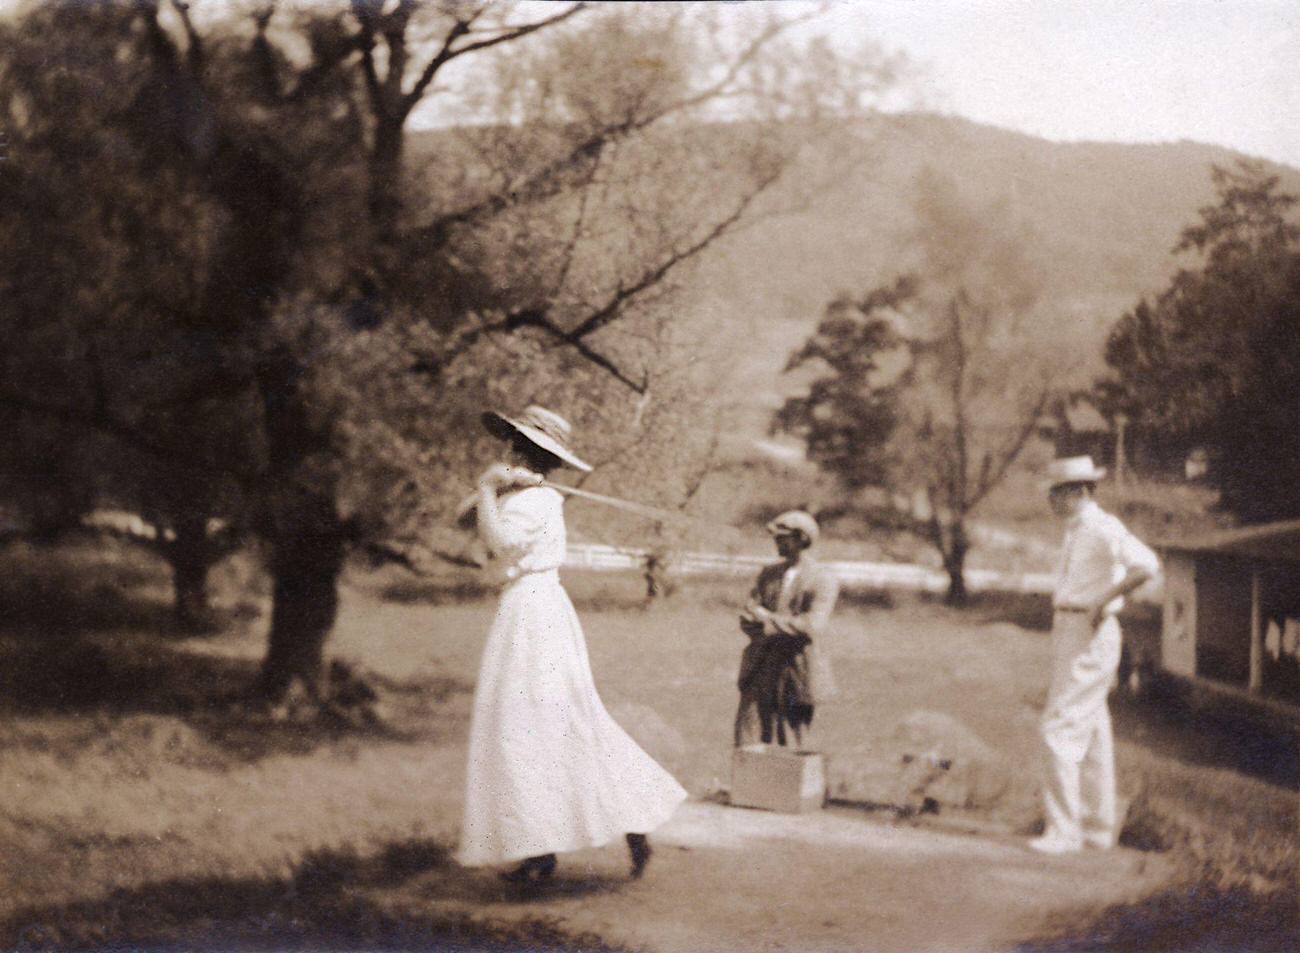 Early twentieth-century woman golfer with male companion and caddy.